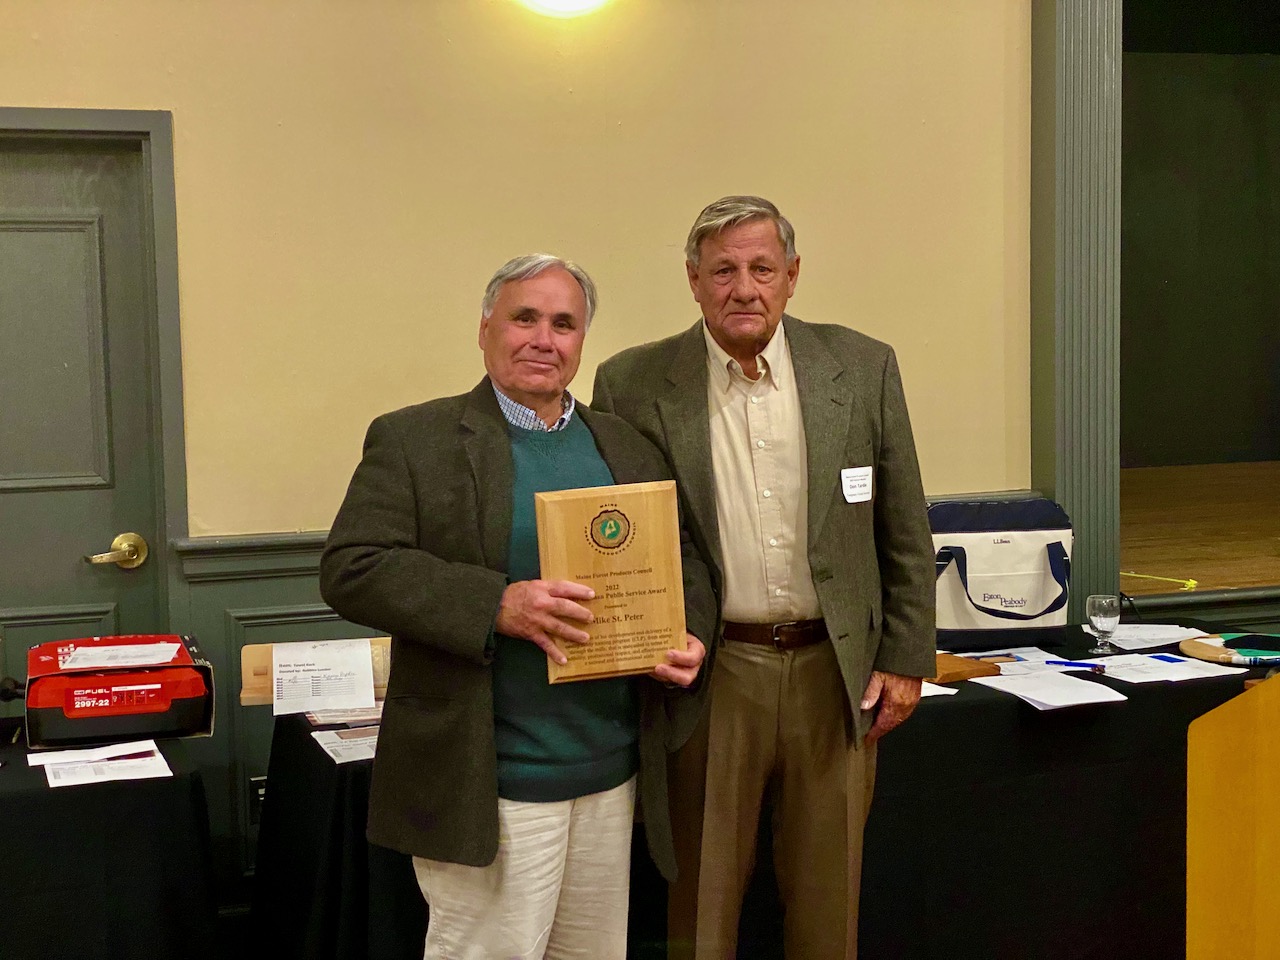 Mike St. Peter Receives Abby Holman Public Service Award